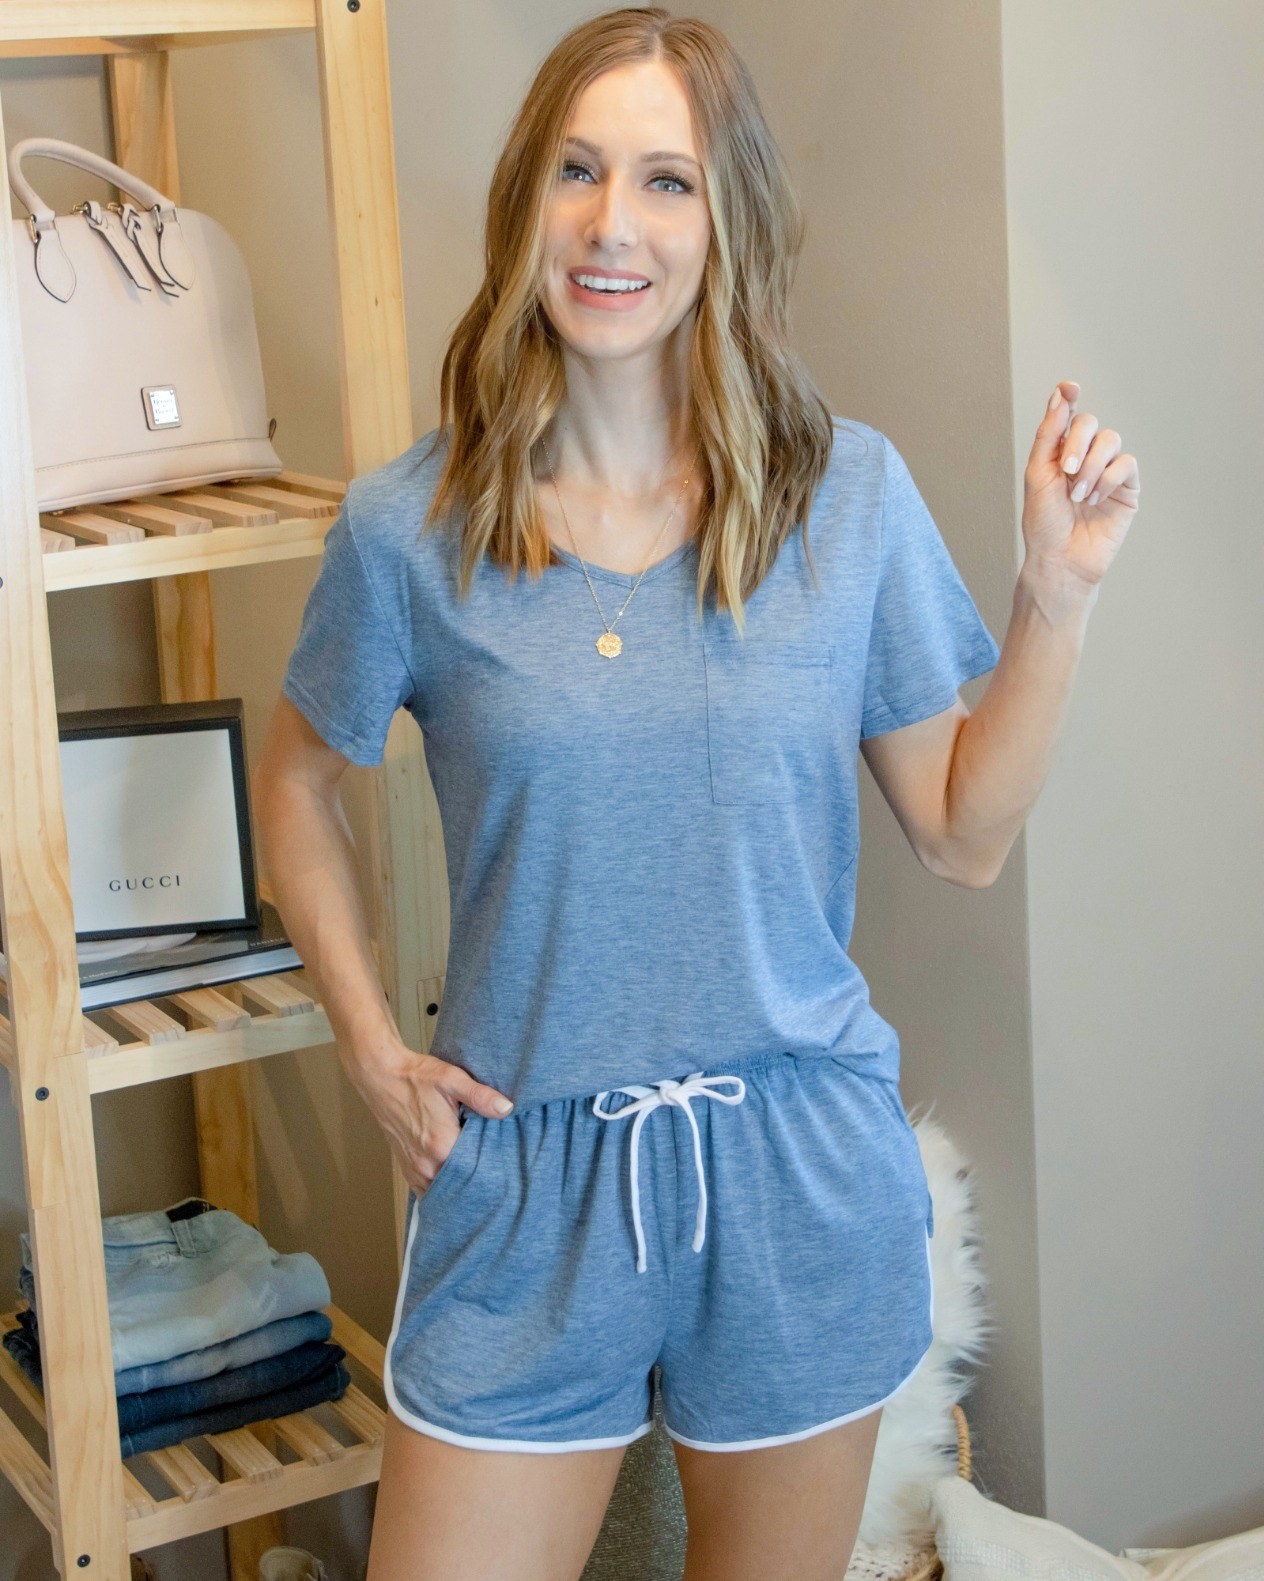 Reviewer is wearing a light blue short sleeve loungewear set with shorts